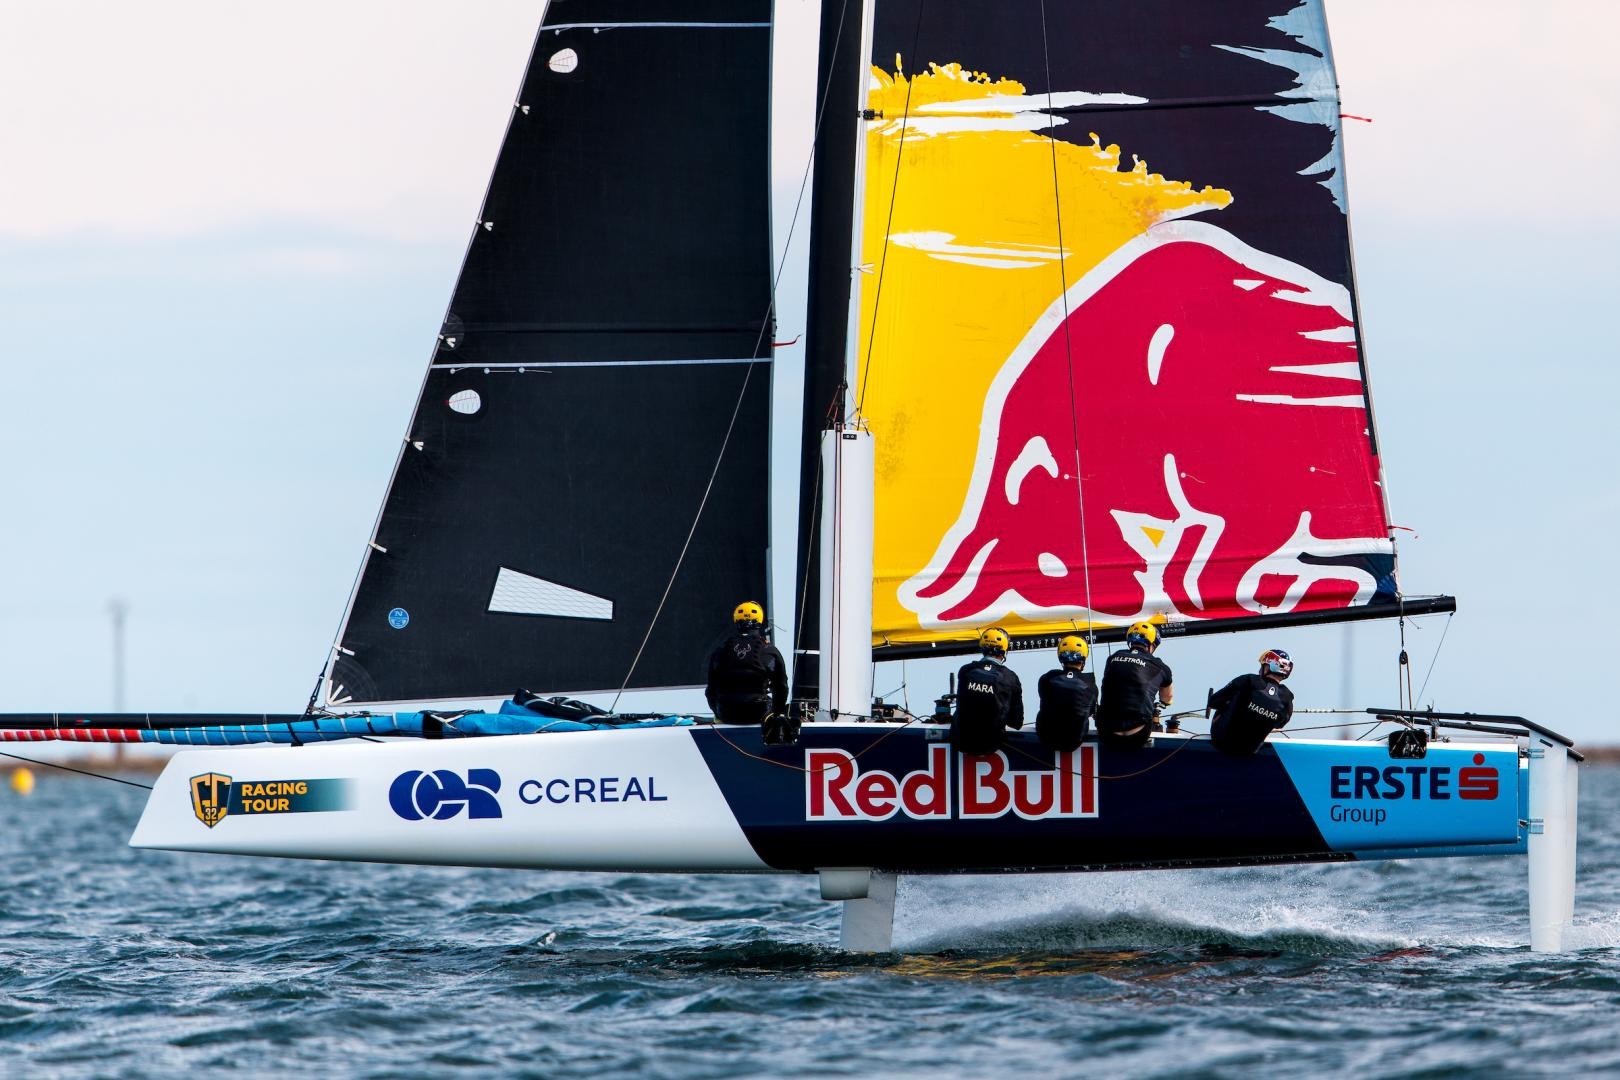 Red Bull Sailing Team out training today. Photo: Sailing Energy / GC32 Racing Tour